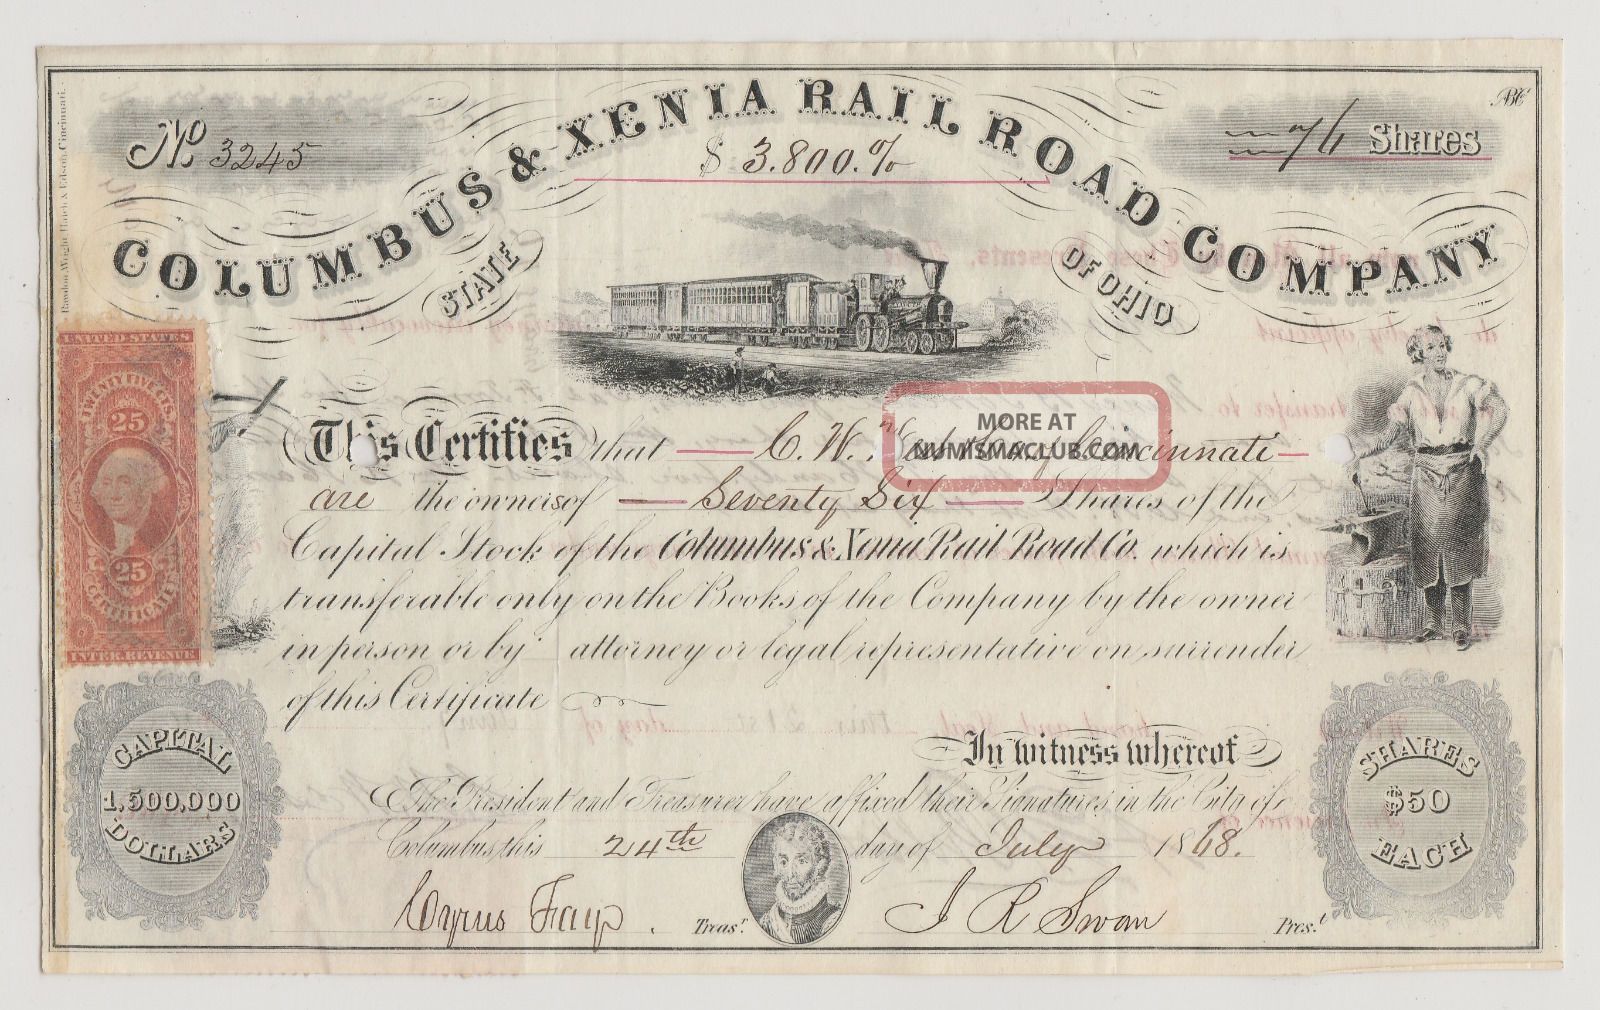 1868 Columbus & Xenia Rail Road Company.  Issued/signed/cancelled/transferred. Transportation photo